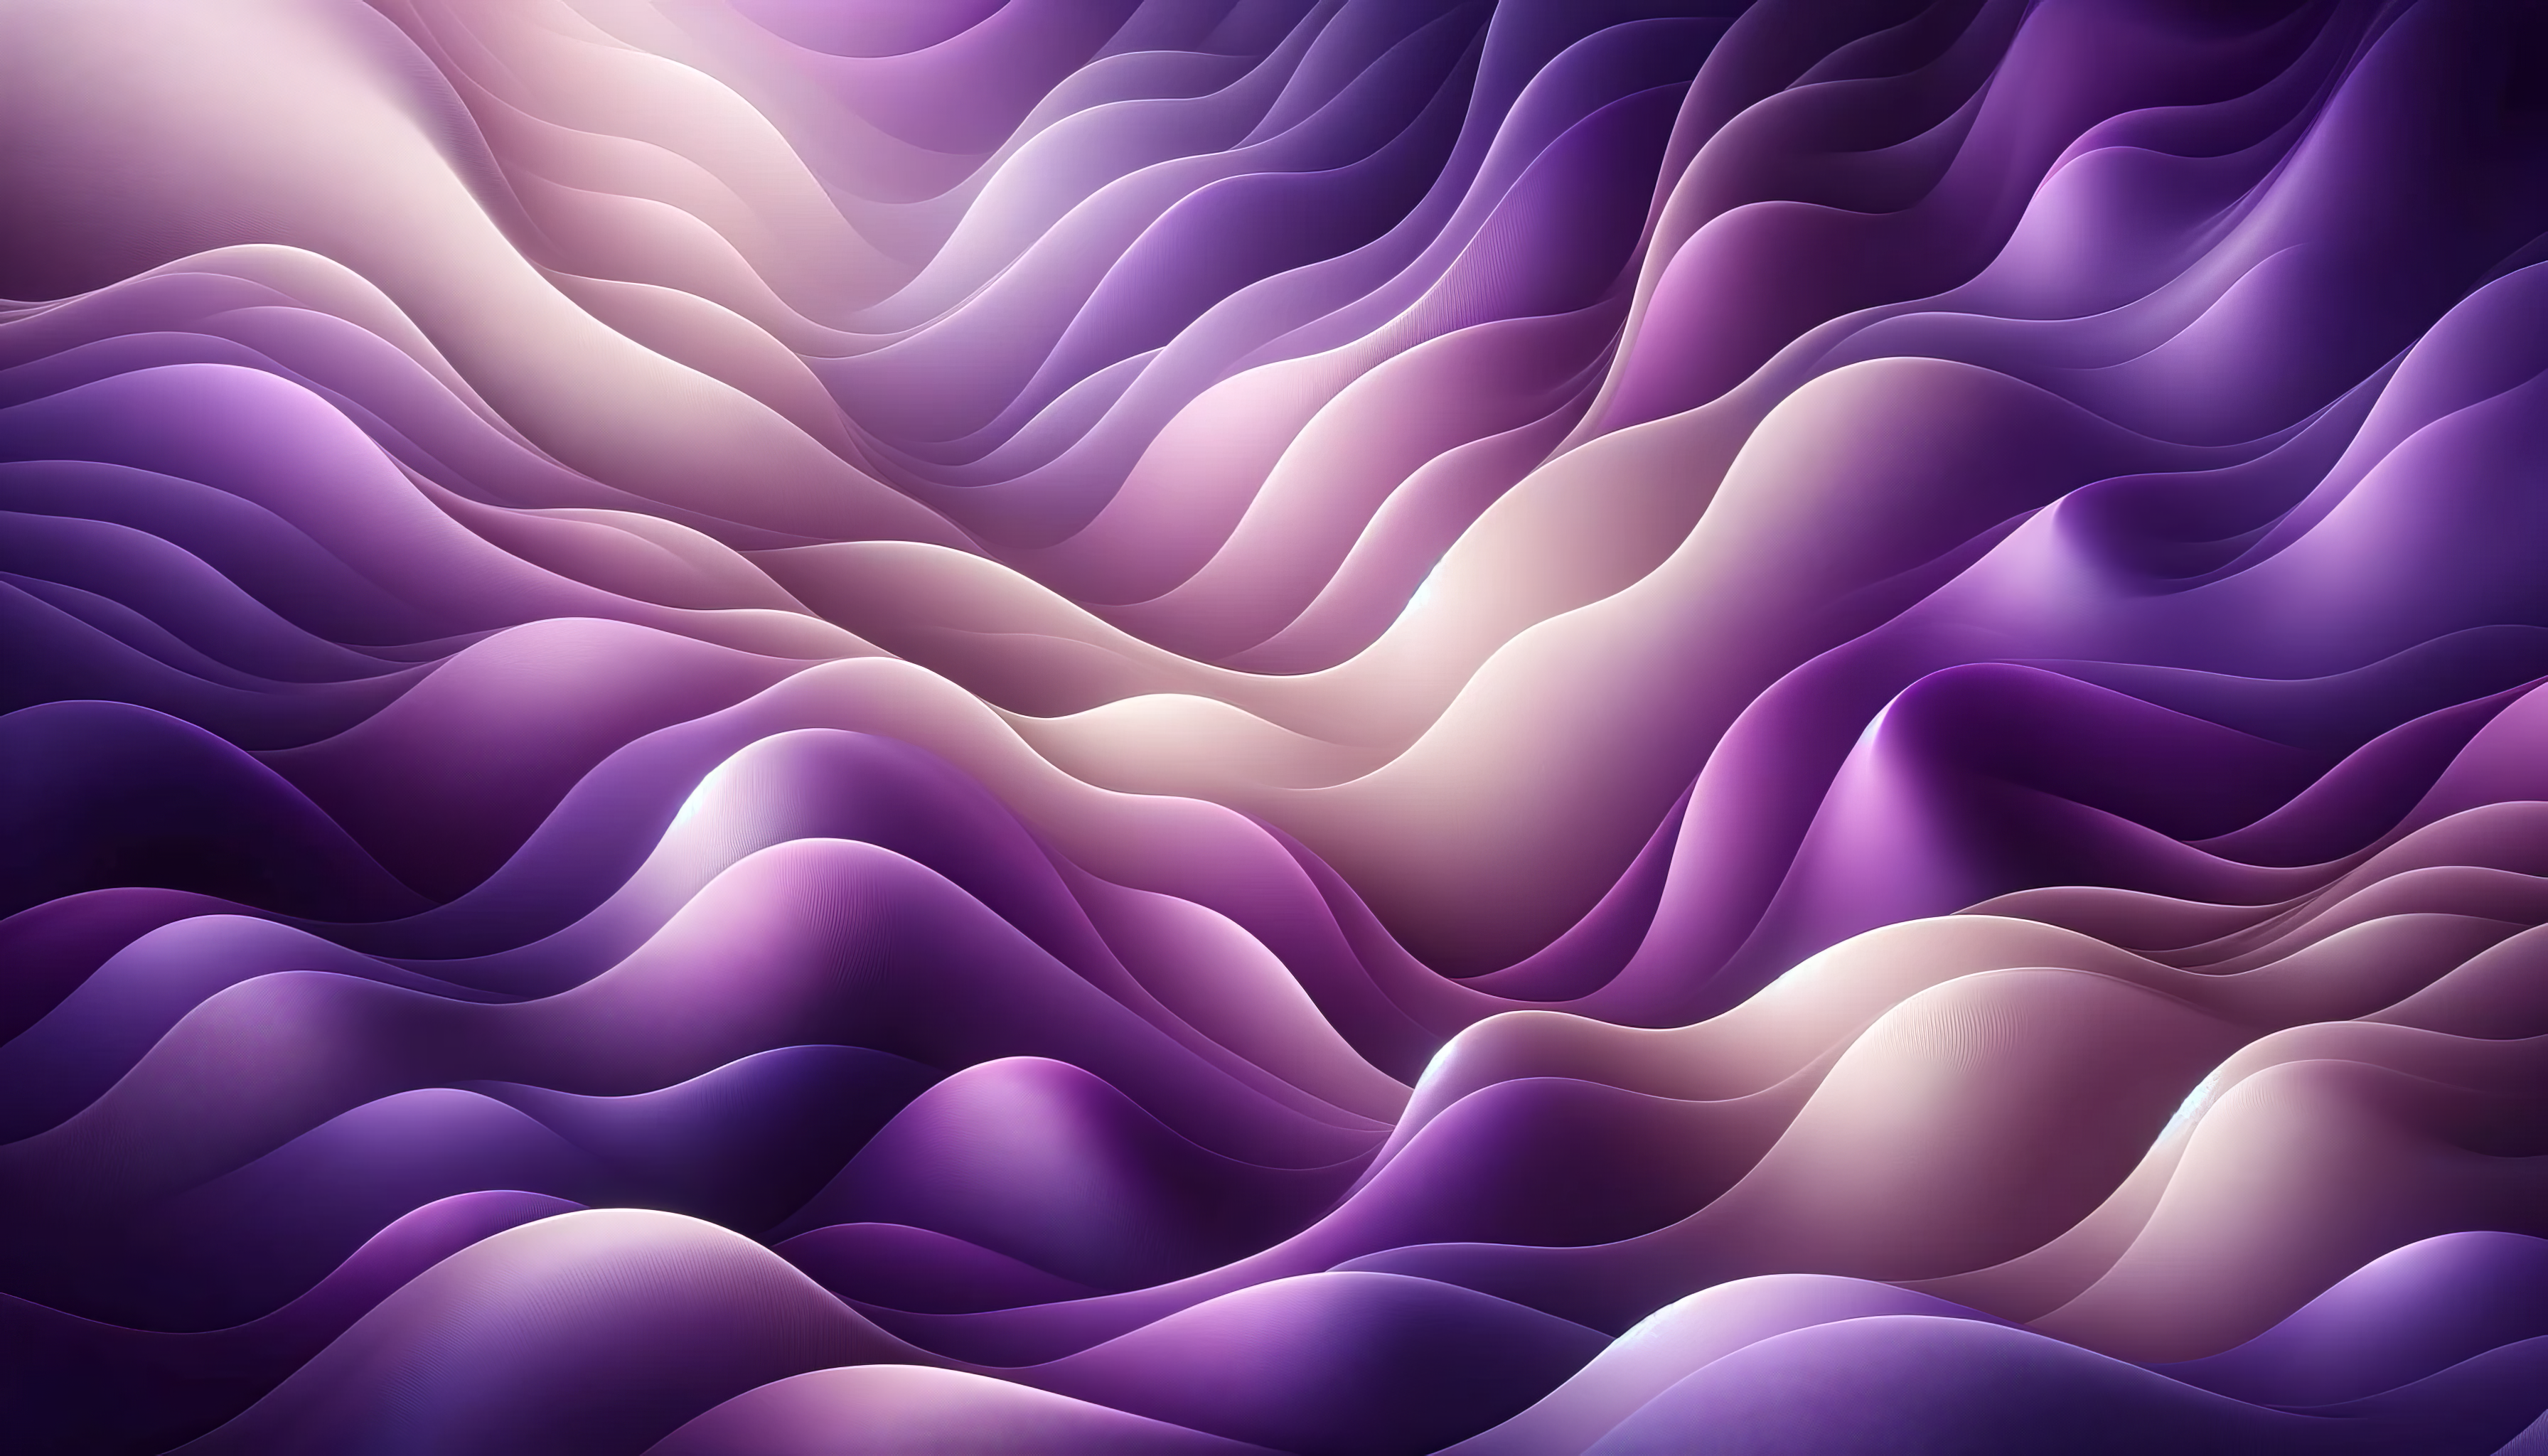 Abstract purple waves HD desktop wallpaper with smooth gradient background.